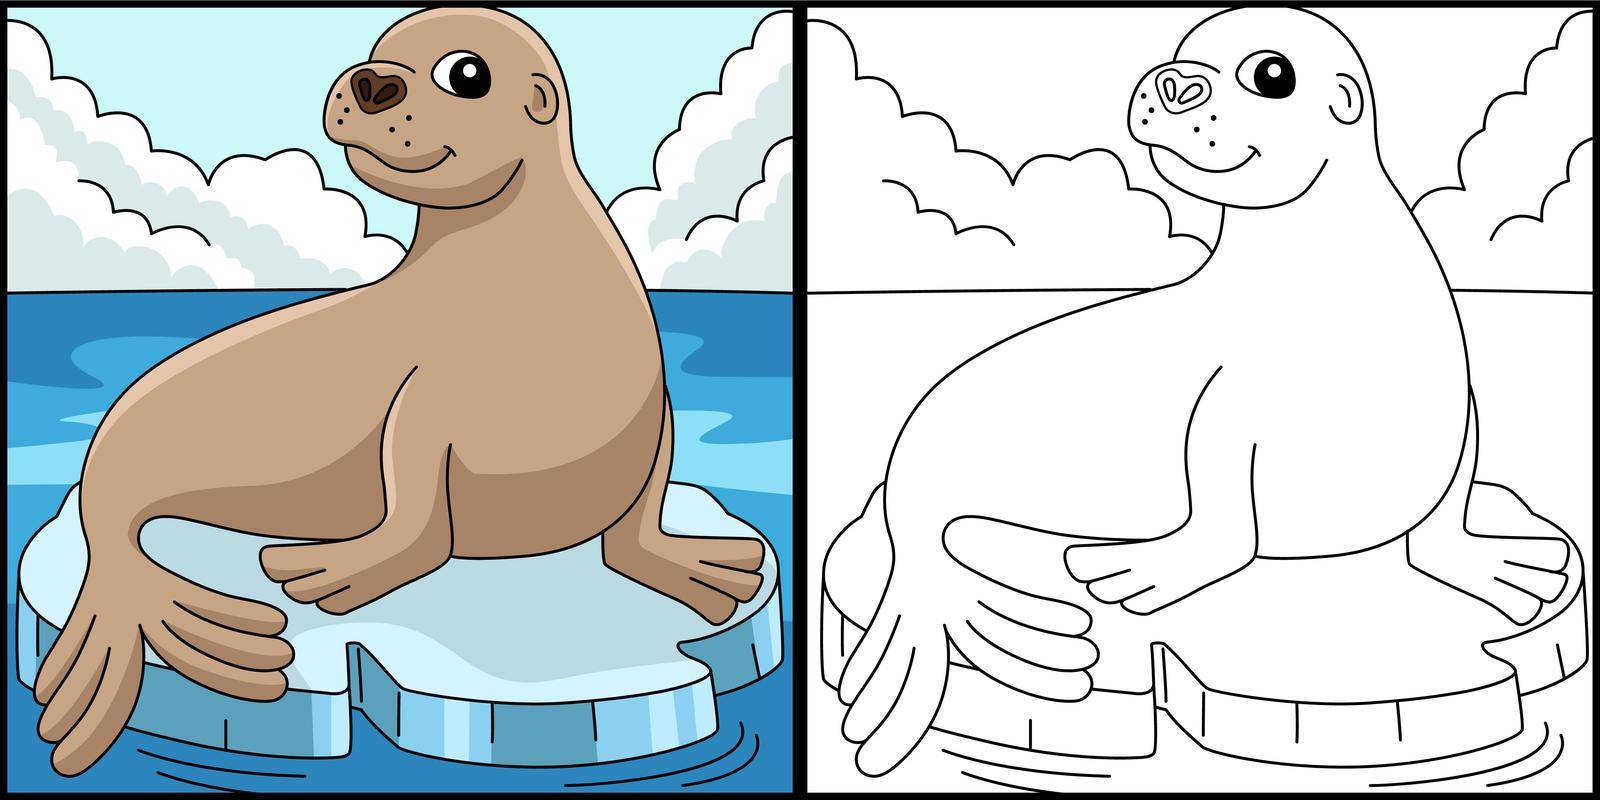 This coloring page shows a sea lion. One side of this illustration is colored and serves as an inspiration for children.